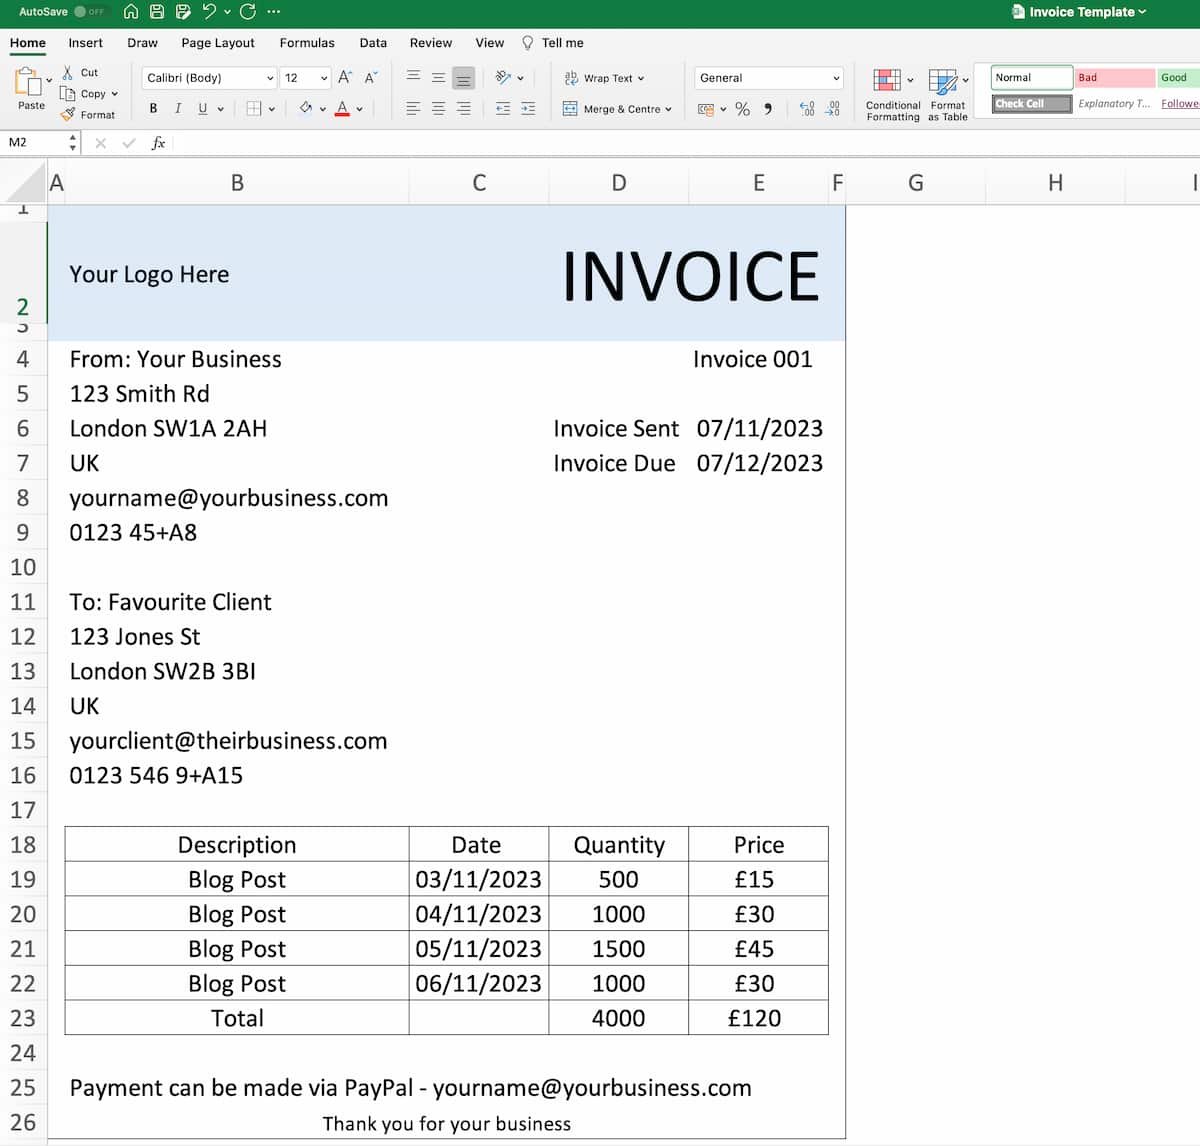 Creating a freelance invoice in Microsoft Excel from scratch, showing the various fields you need to fill in.